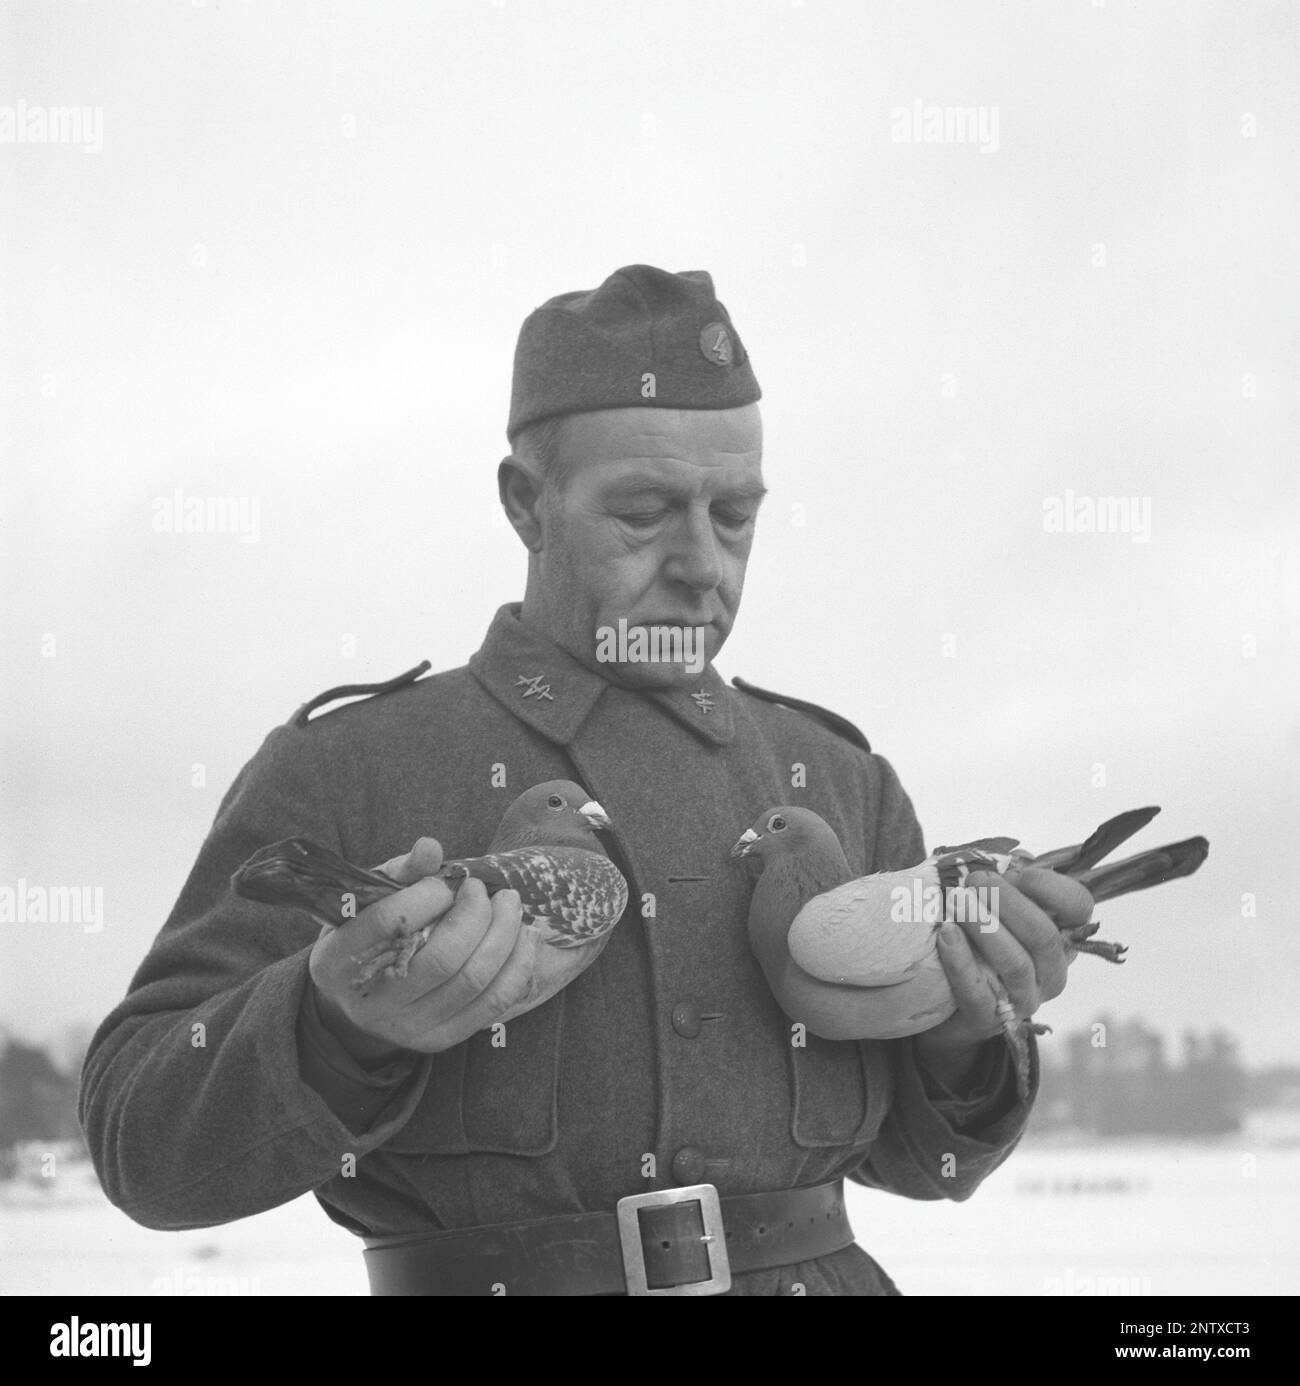 Swedish army during WW2. A soldier is seen holding a pigeons in his hands. War pigeons were used by the swedish military during World War II. The pigeons carried messages from one place to another often a piece of paper in a small metal container attached to it's leg. Homing pigeons were handled and trained by a special unit of swedish military. Homing pigeons played a vital part in the invasion of Normandy as radios could not be used for fear of vital information being intercepted by the enemy. Sweden december 1940. Kristoffersson ref 184-4 Stock Photo